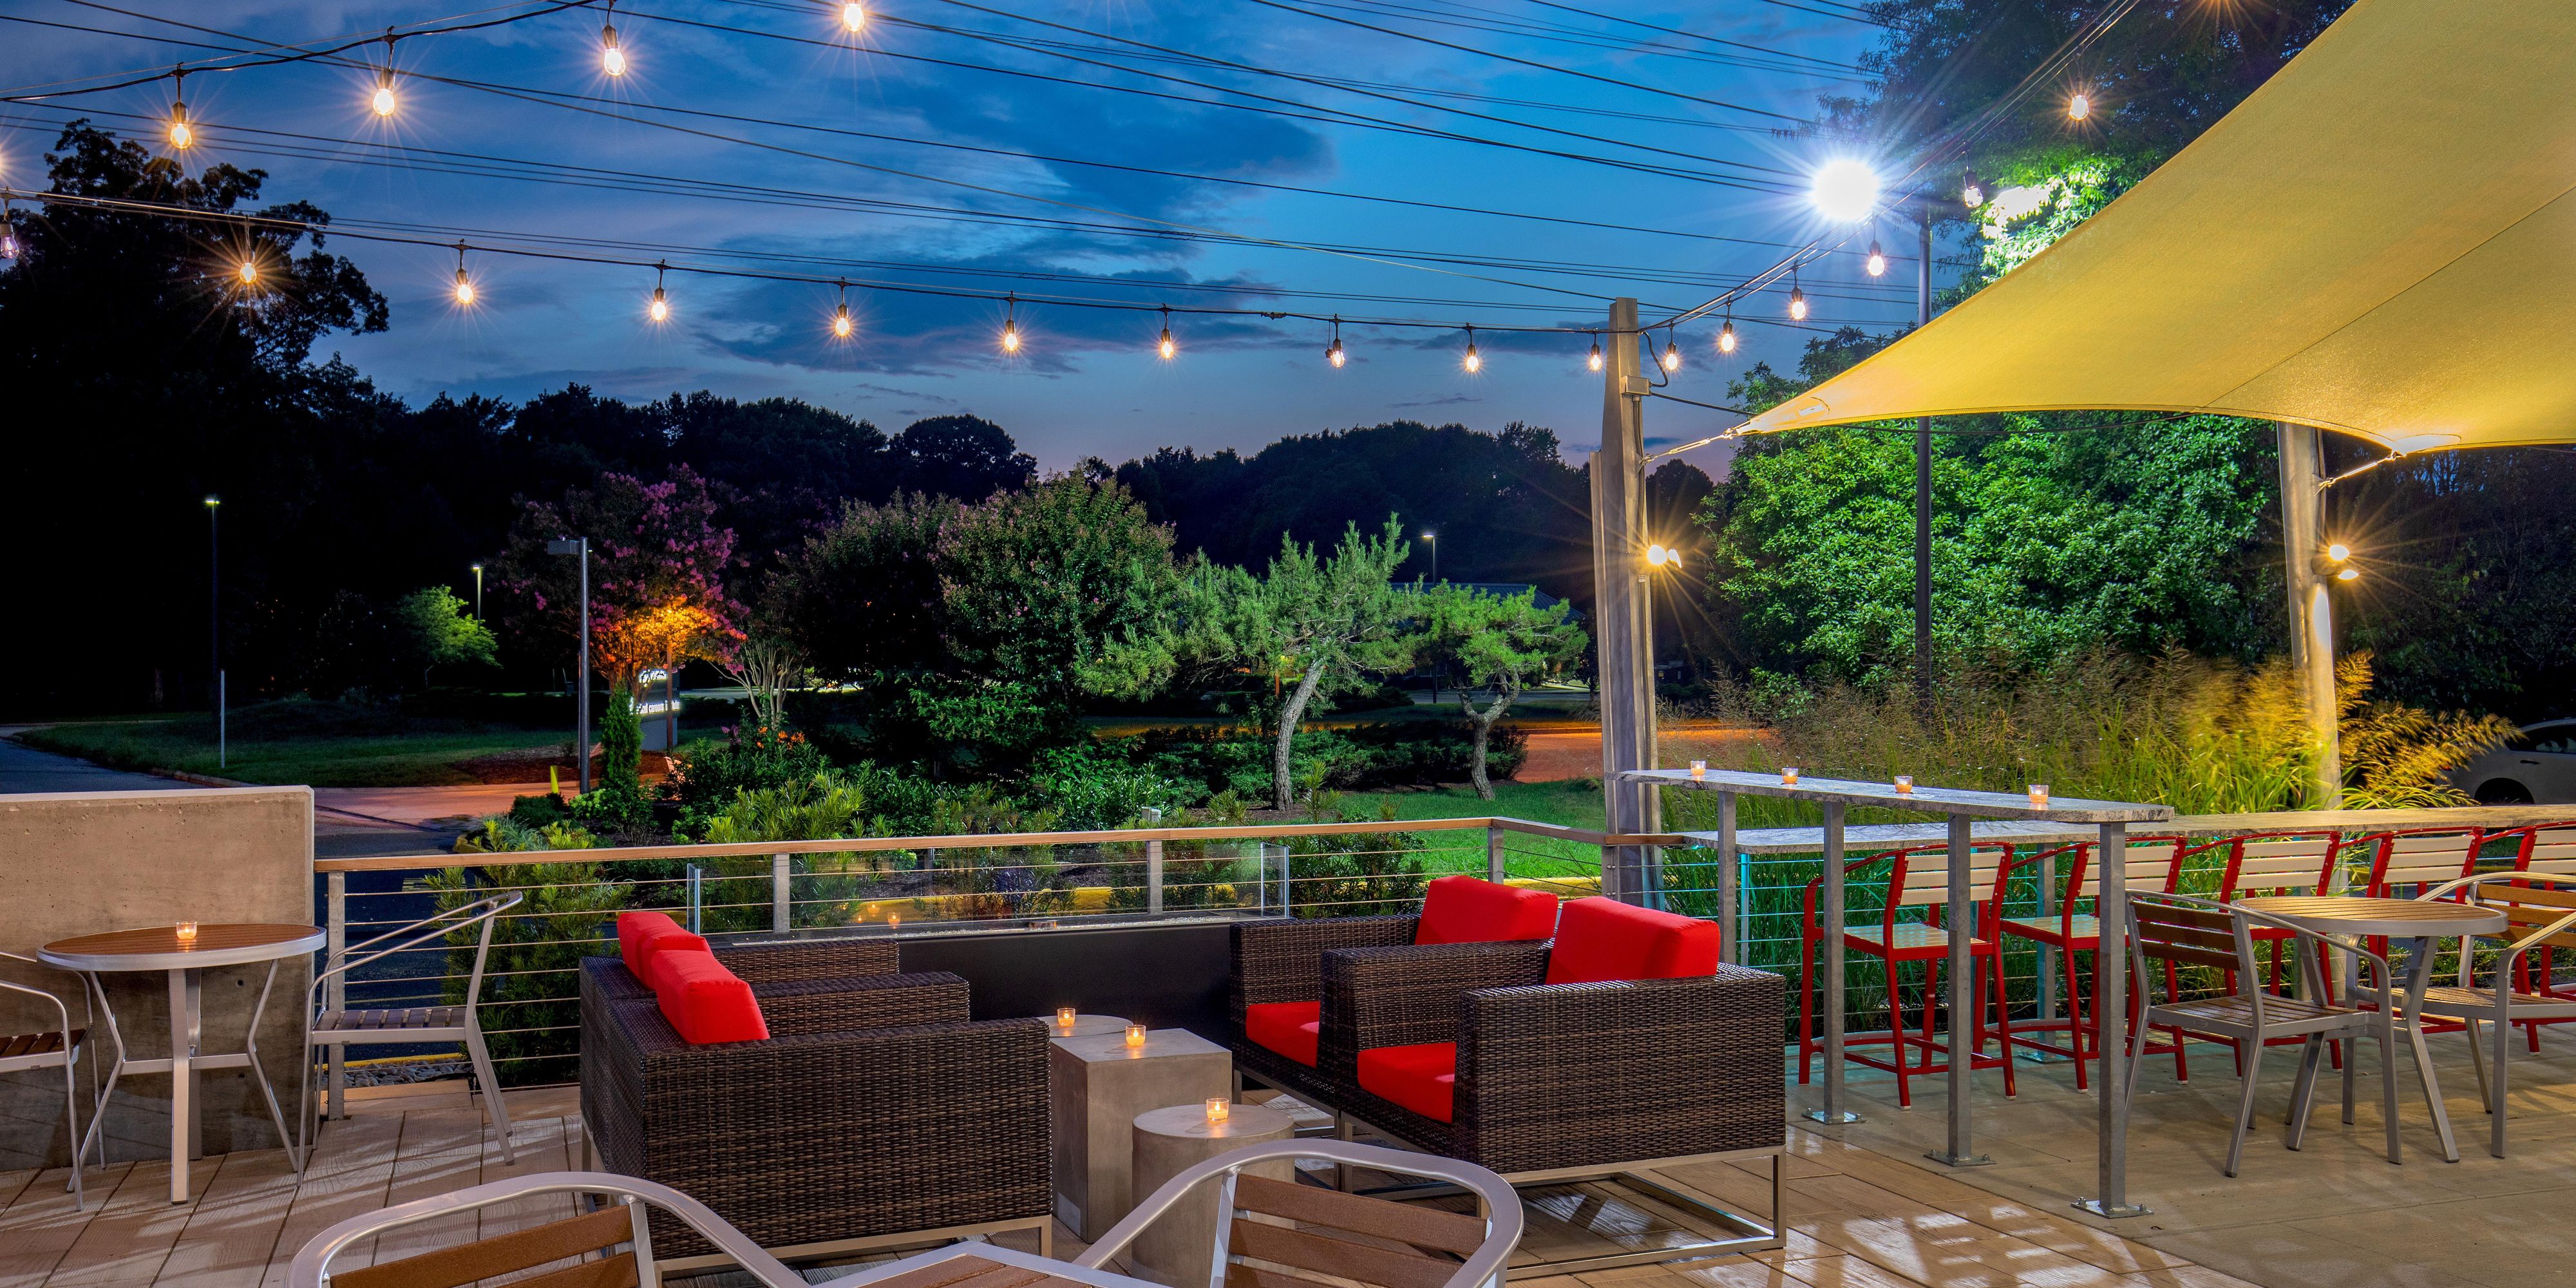 Enjoy a juicy burger and craft beer in our outdoor patio space